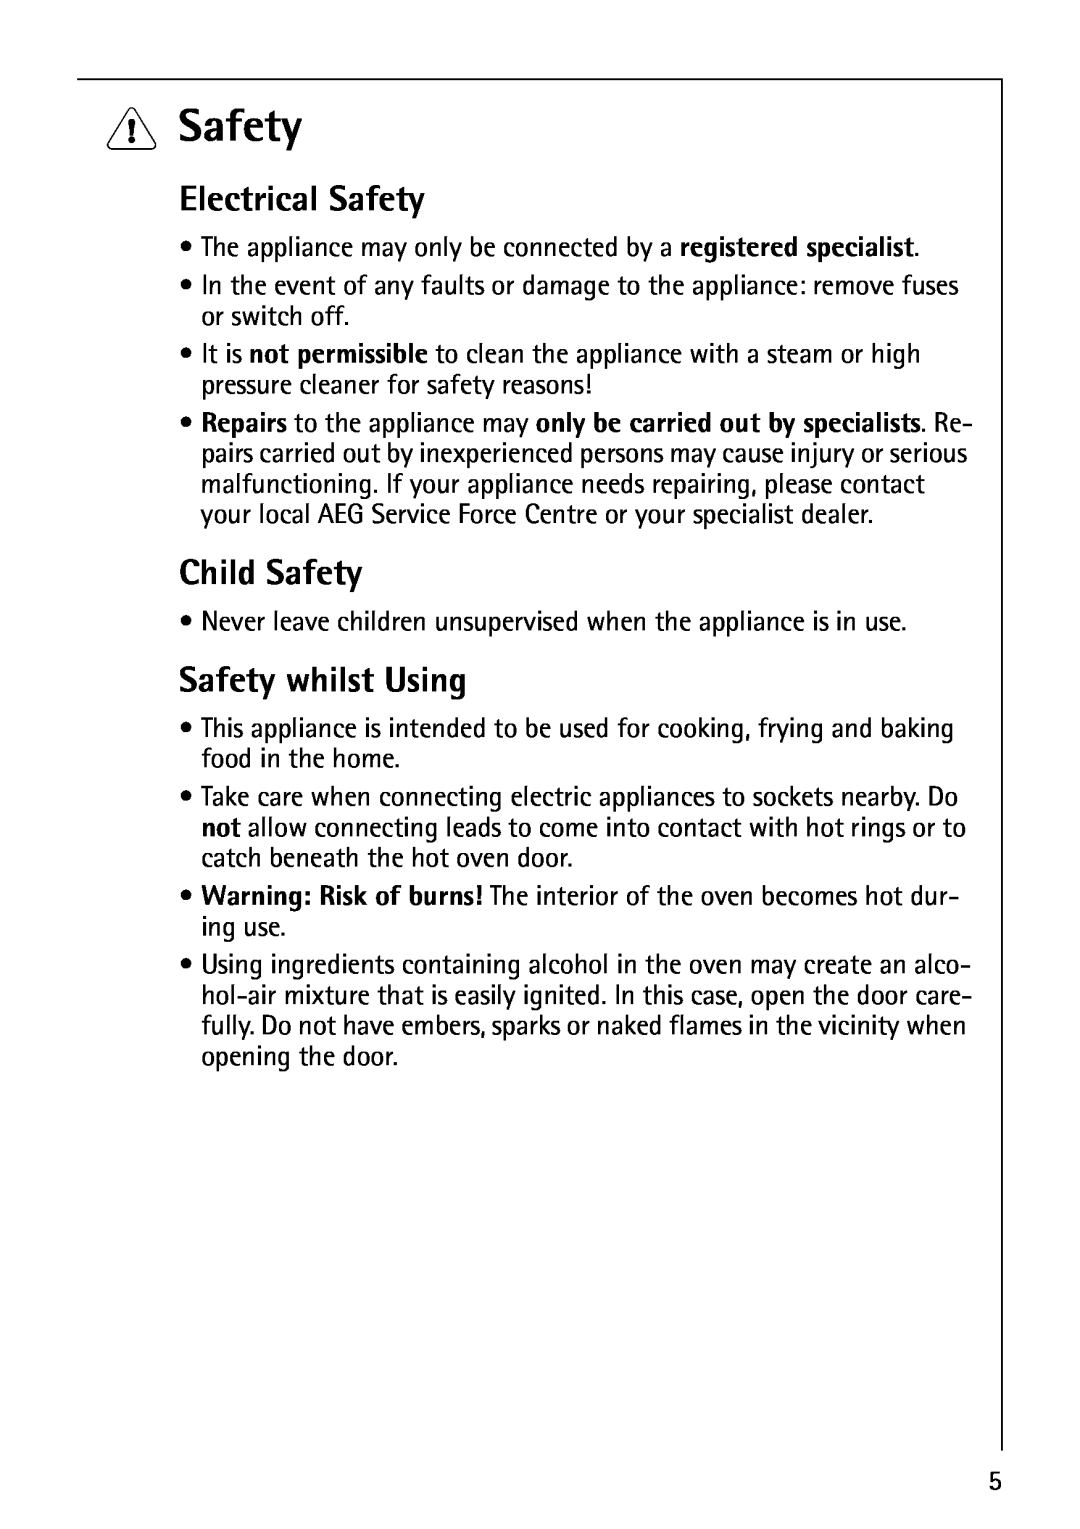 AEG B4130-1 operating instructions 1Safety, Electrical Safety, Child Safety, Safety whilst Using 